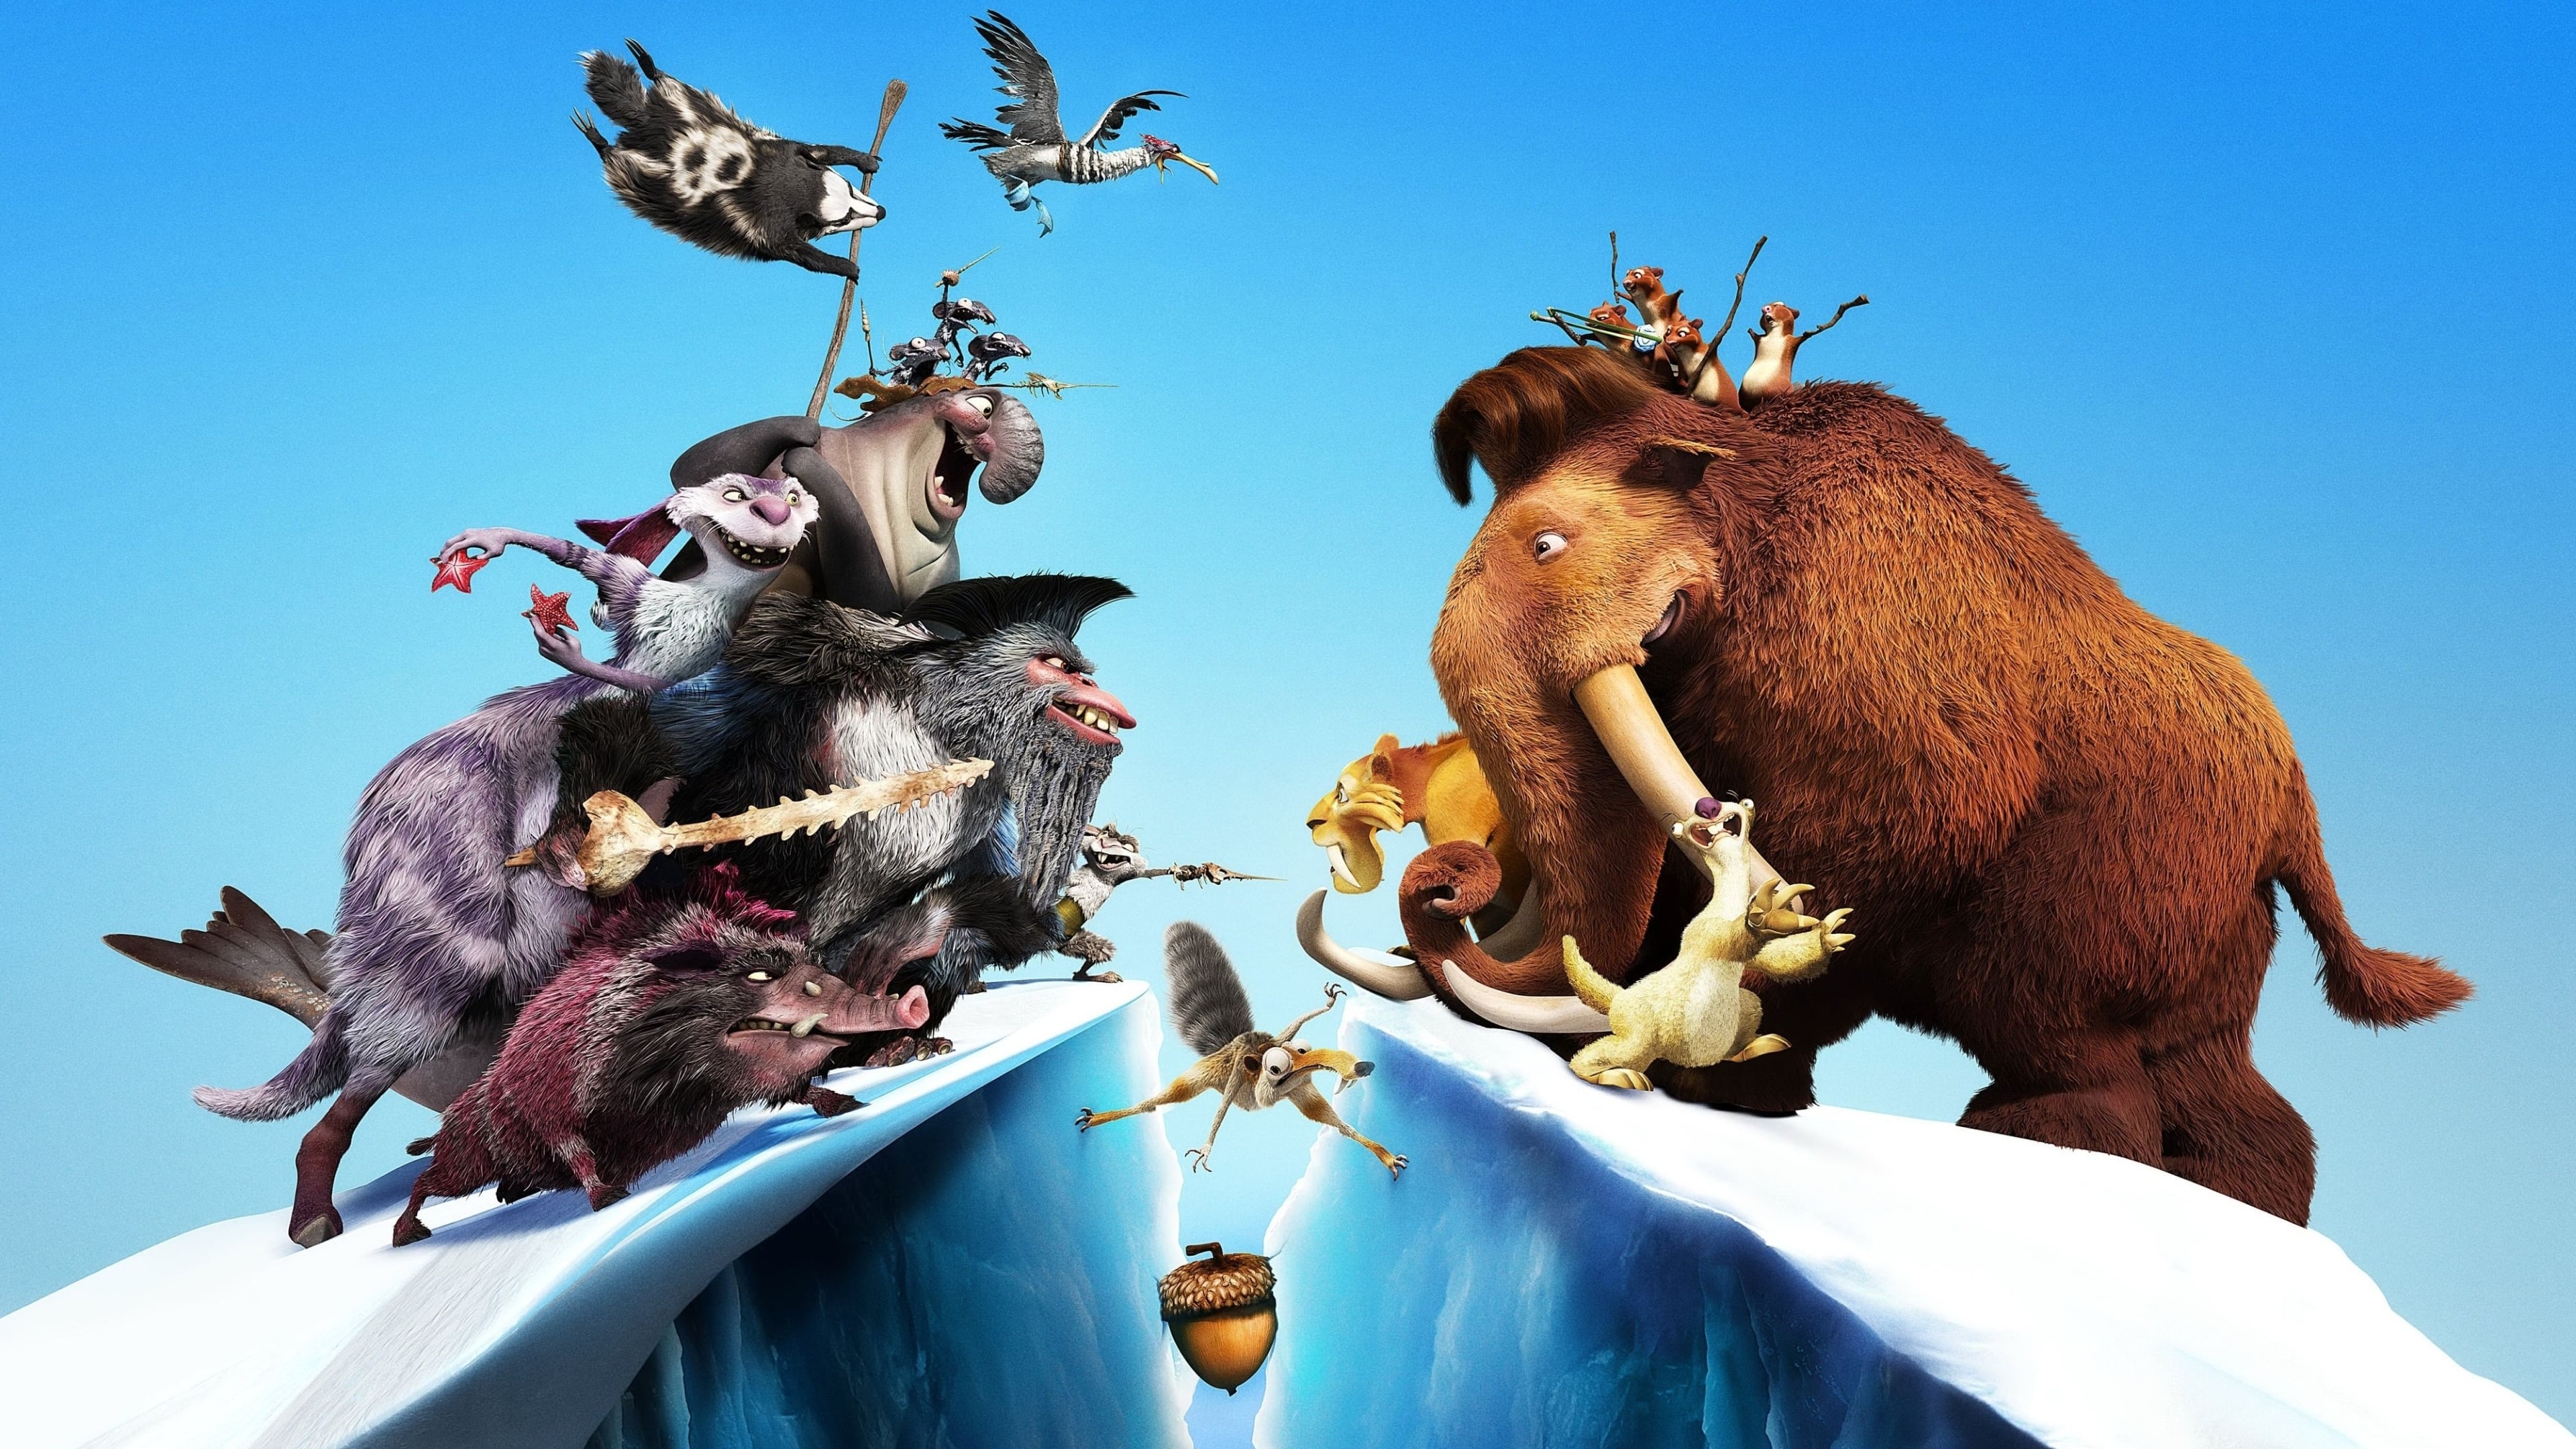 Ice Age: Continental Drift 2012 123movies